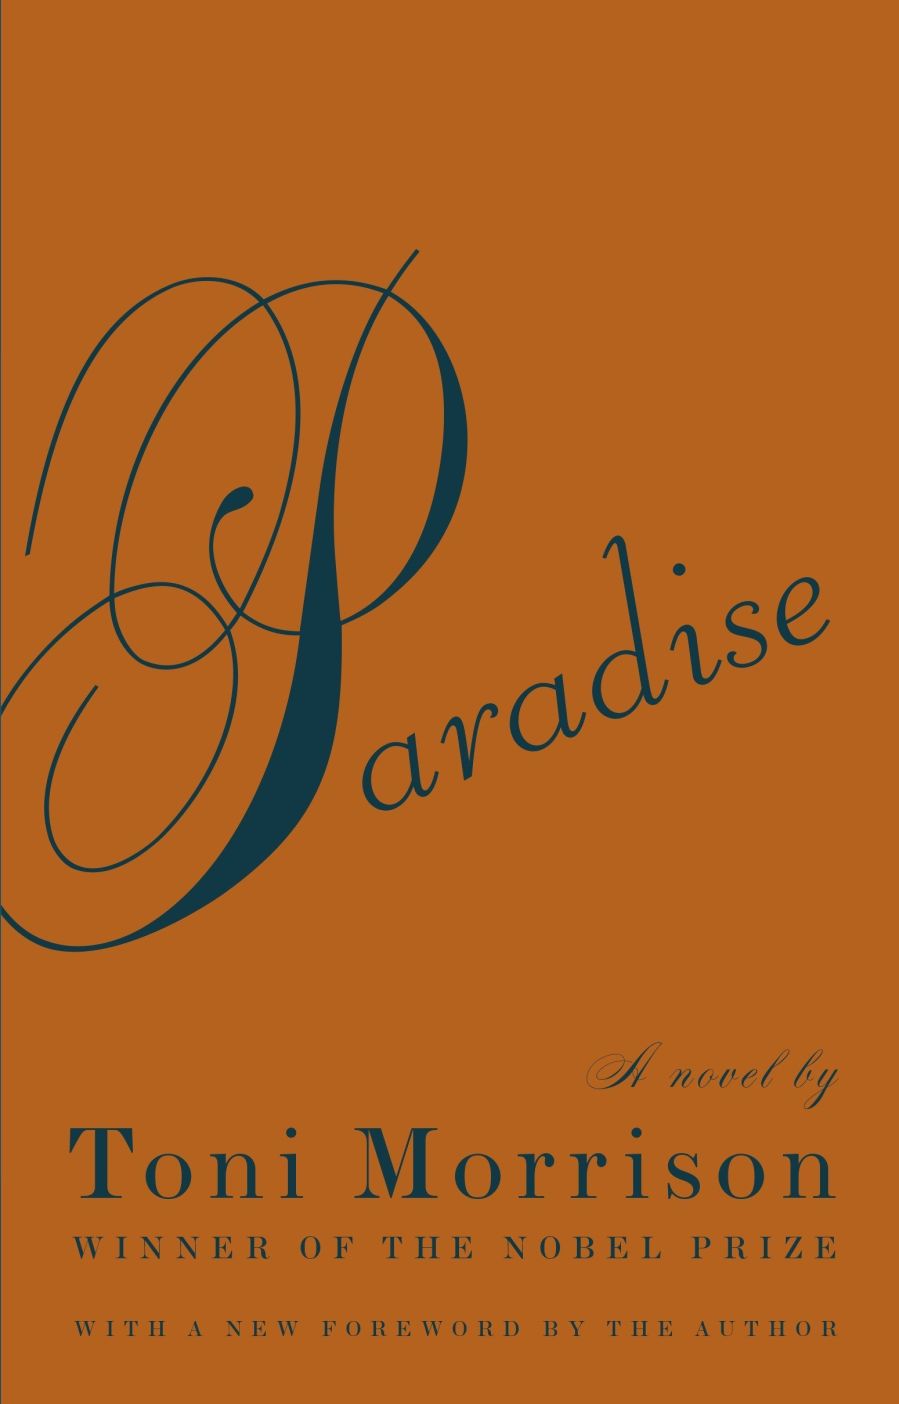 book cover of Paradise, by Toni Morrison.